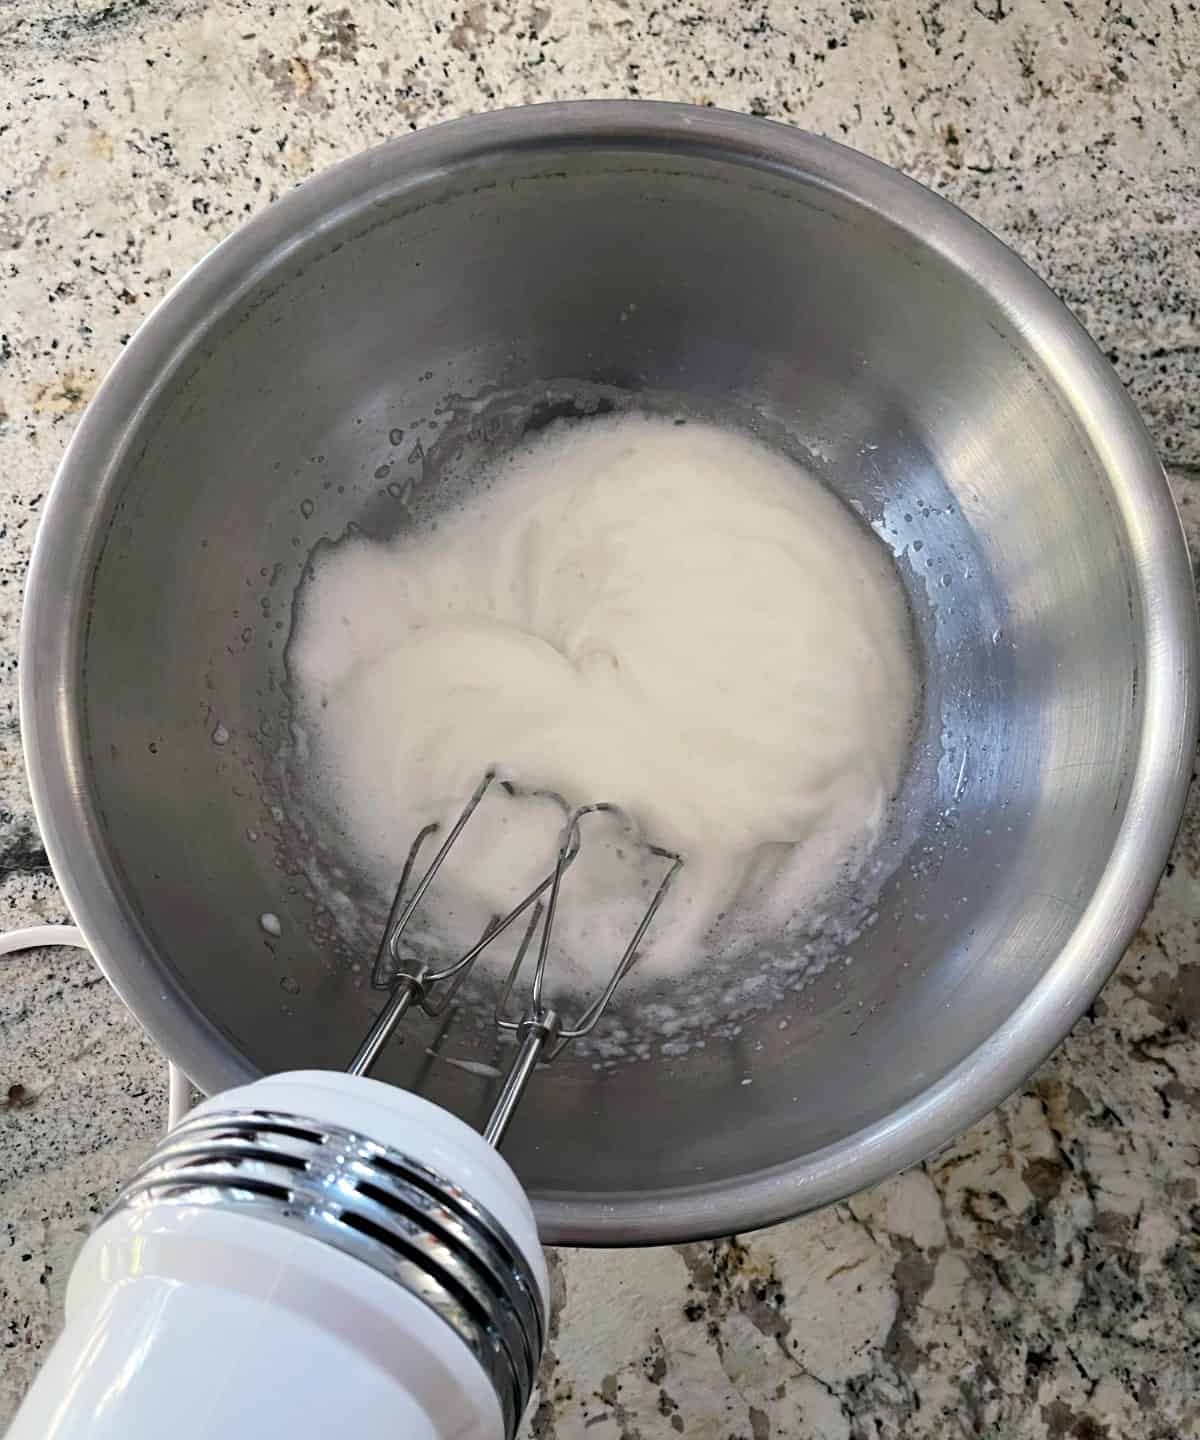 Beating egg whites in mixing bowl with handheld electric mixer.